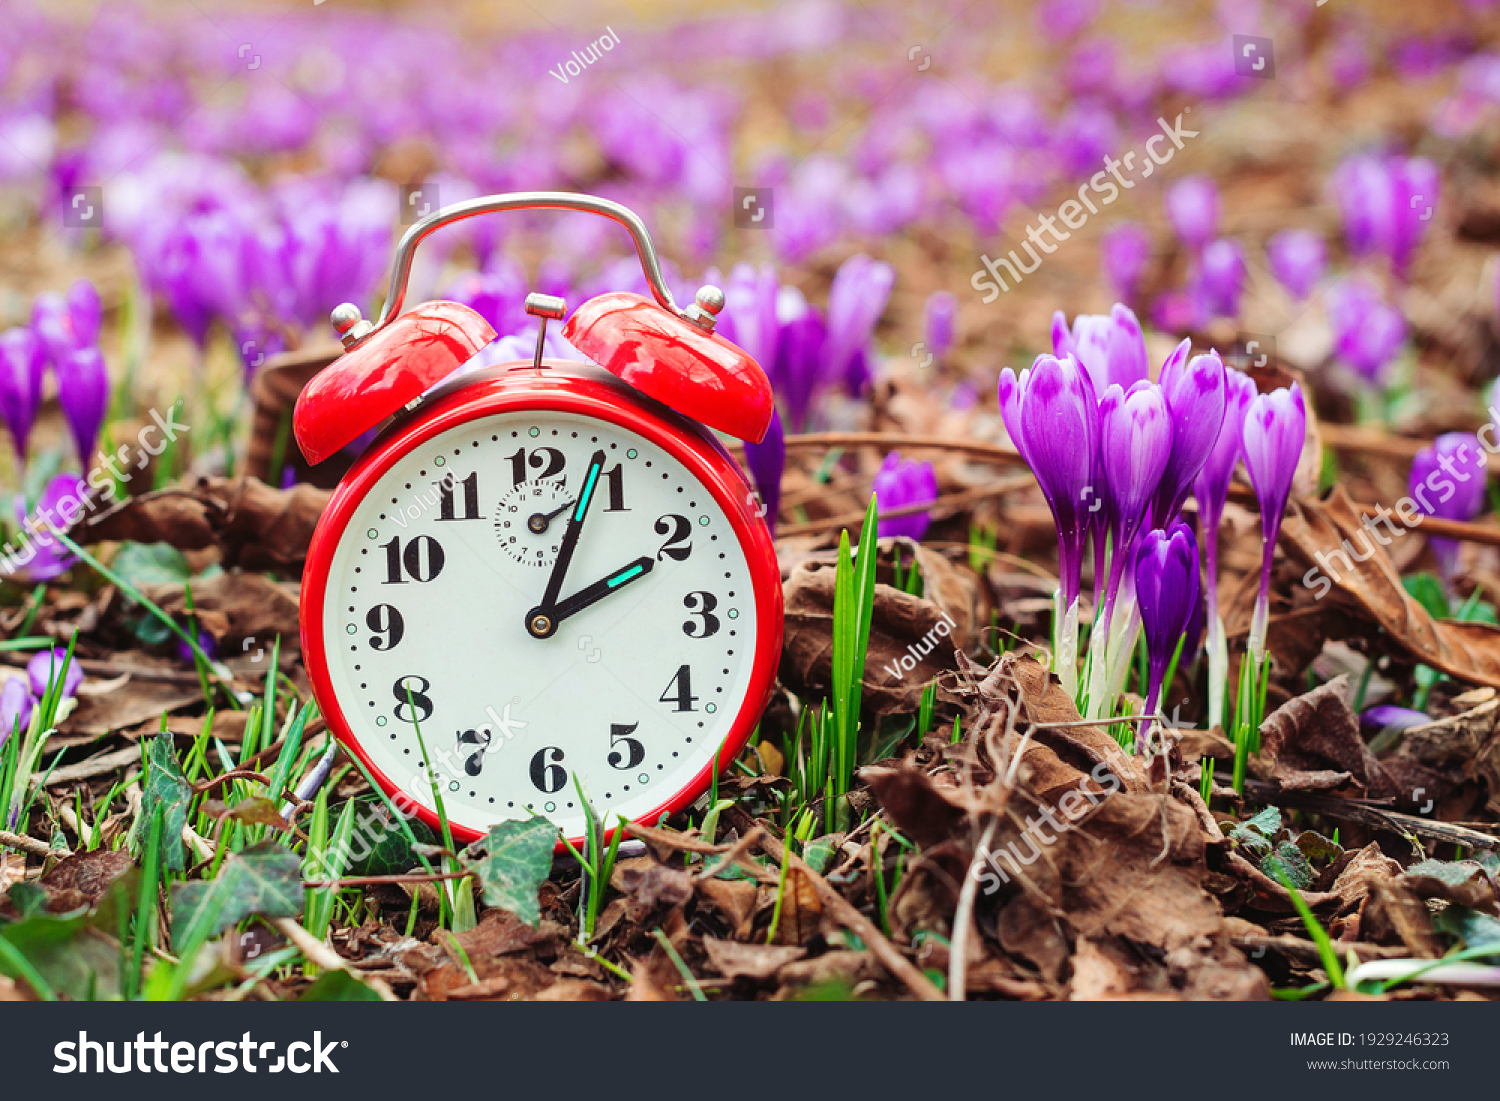 Classic alarm clock over spring flowers background. Daylight saving time reminder. Spring natural background with first flowers. Blooming crocus flowers. Spring time change background. #1929246323